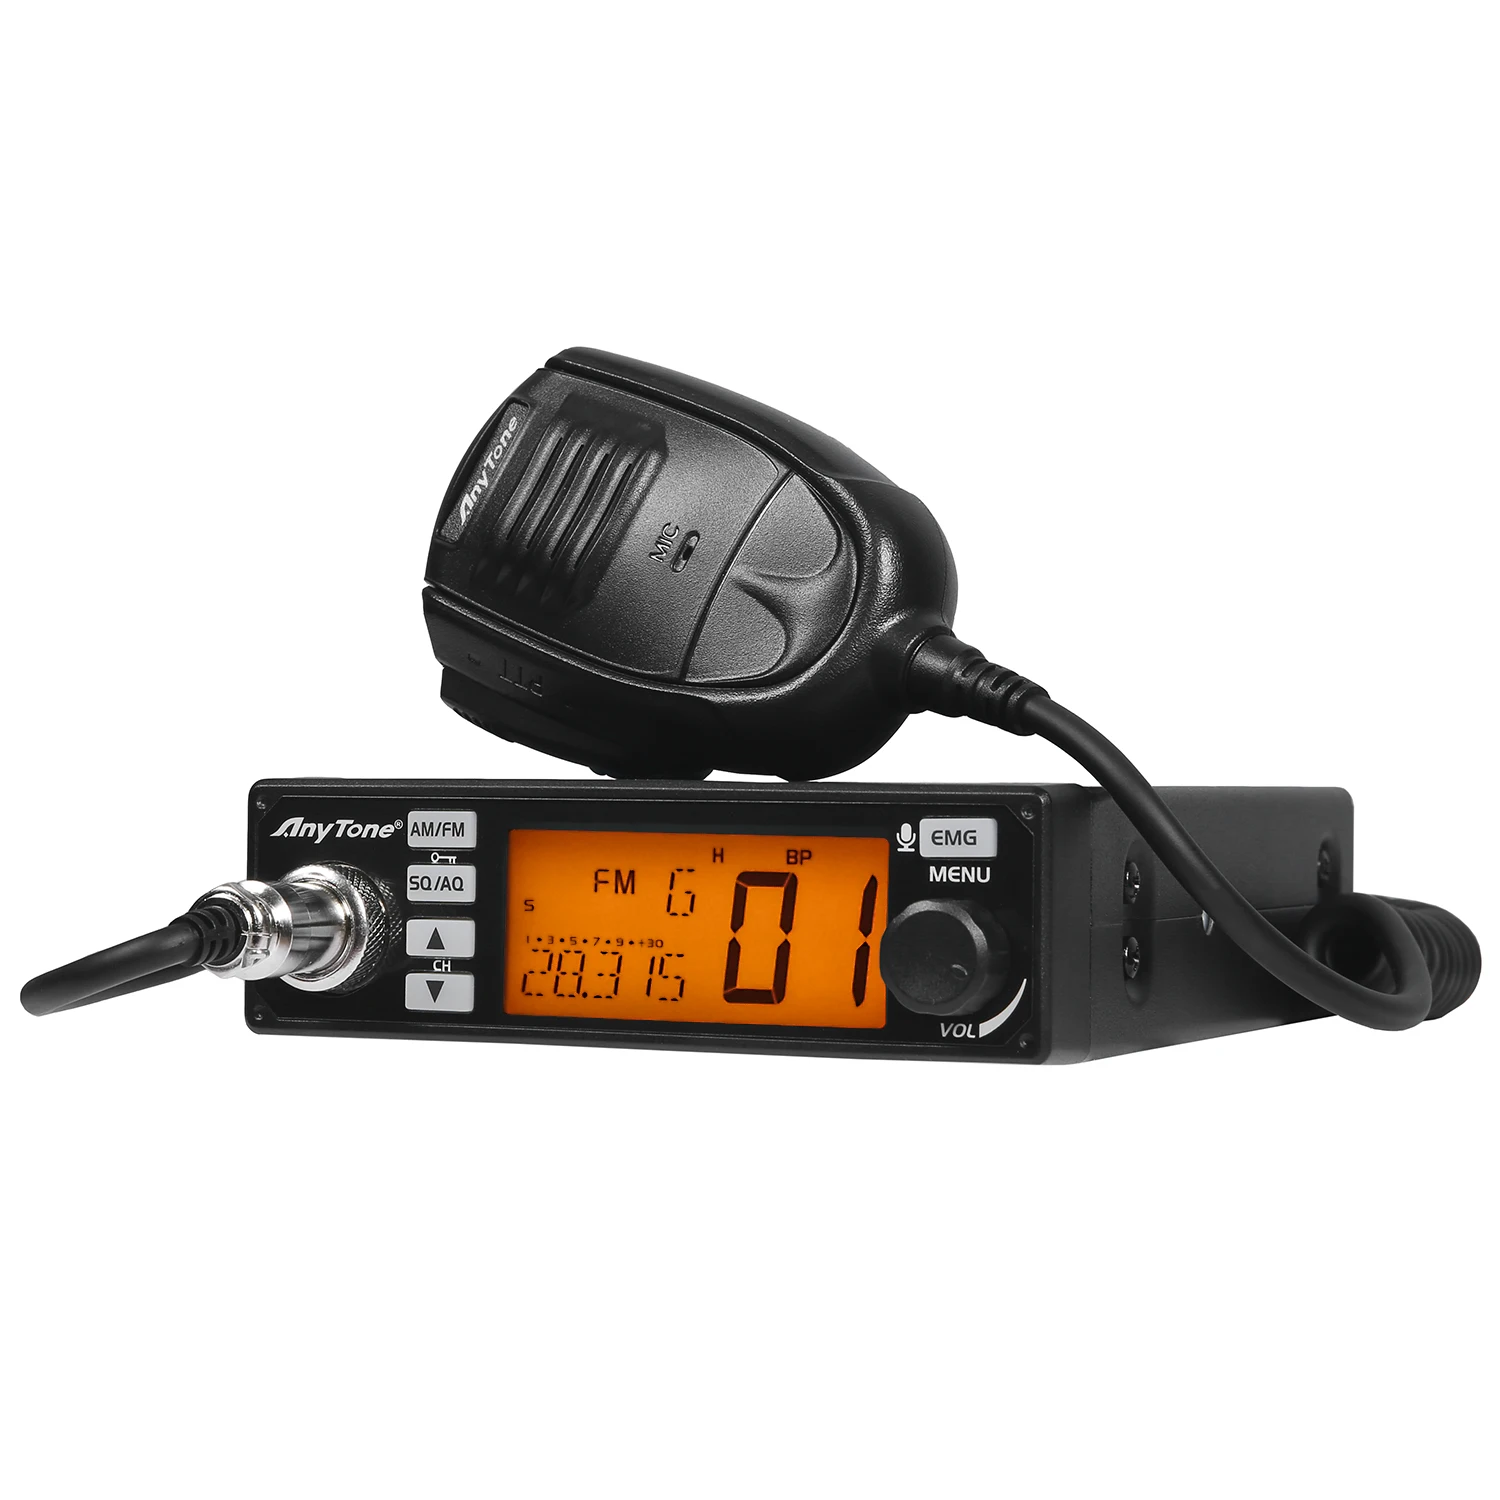 AnyTone AT-500M AM FM 10 Meter 24.715~30.105MHz with VOX,RB,NB,Scan,Dual-watch,HI-CUT,7 Color Display,Amateur Radio For Truckers enlarge